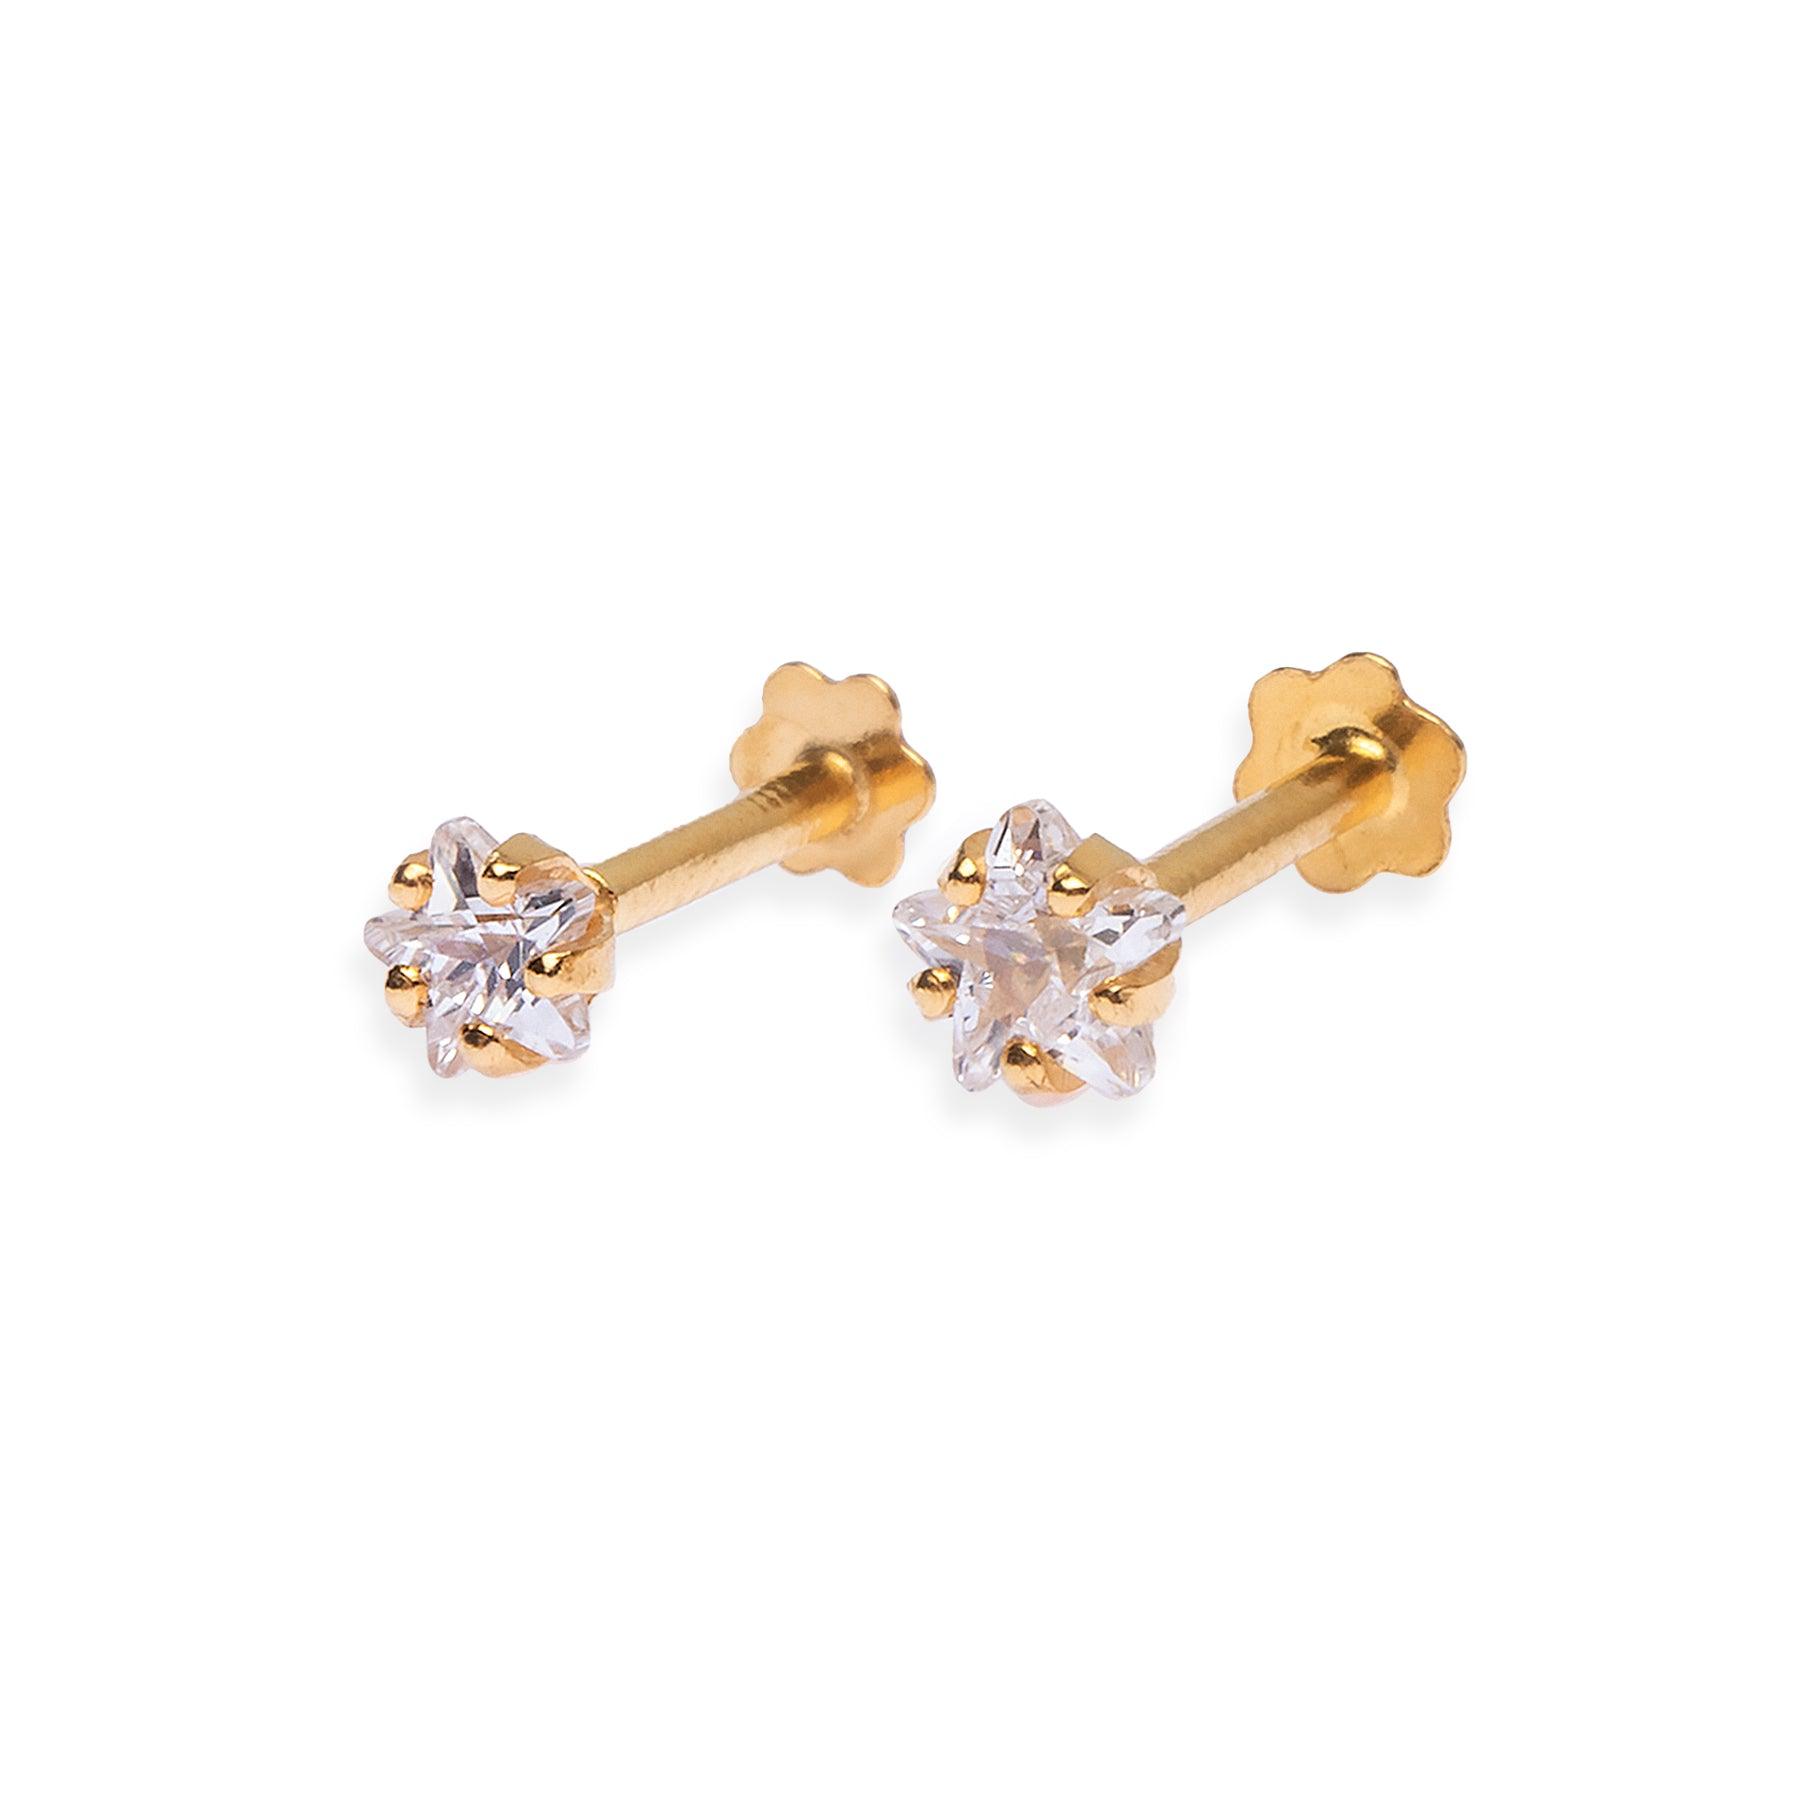 18ct Yellow Gold Screw Back Nose Stud set with a Star Shaped Cubic Zirconia (3mm - 3.5mm) NIP-4-620 - Minar Jewellers